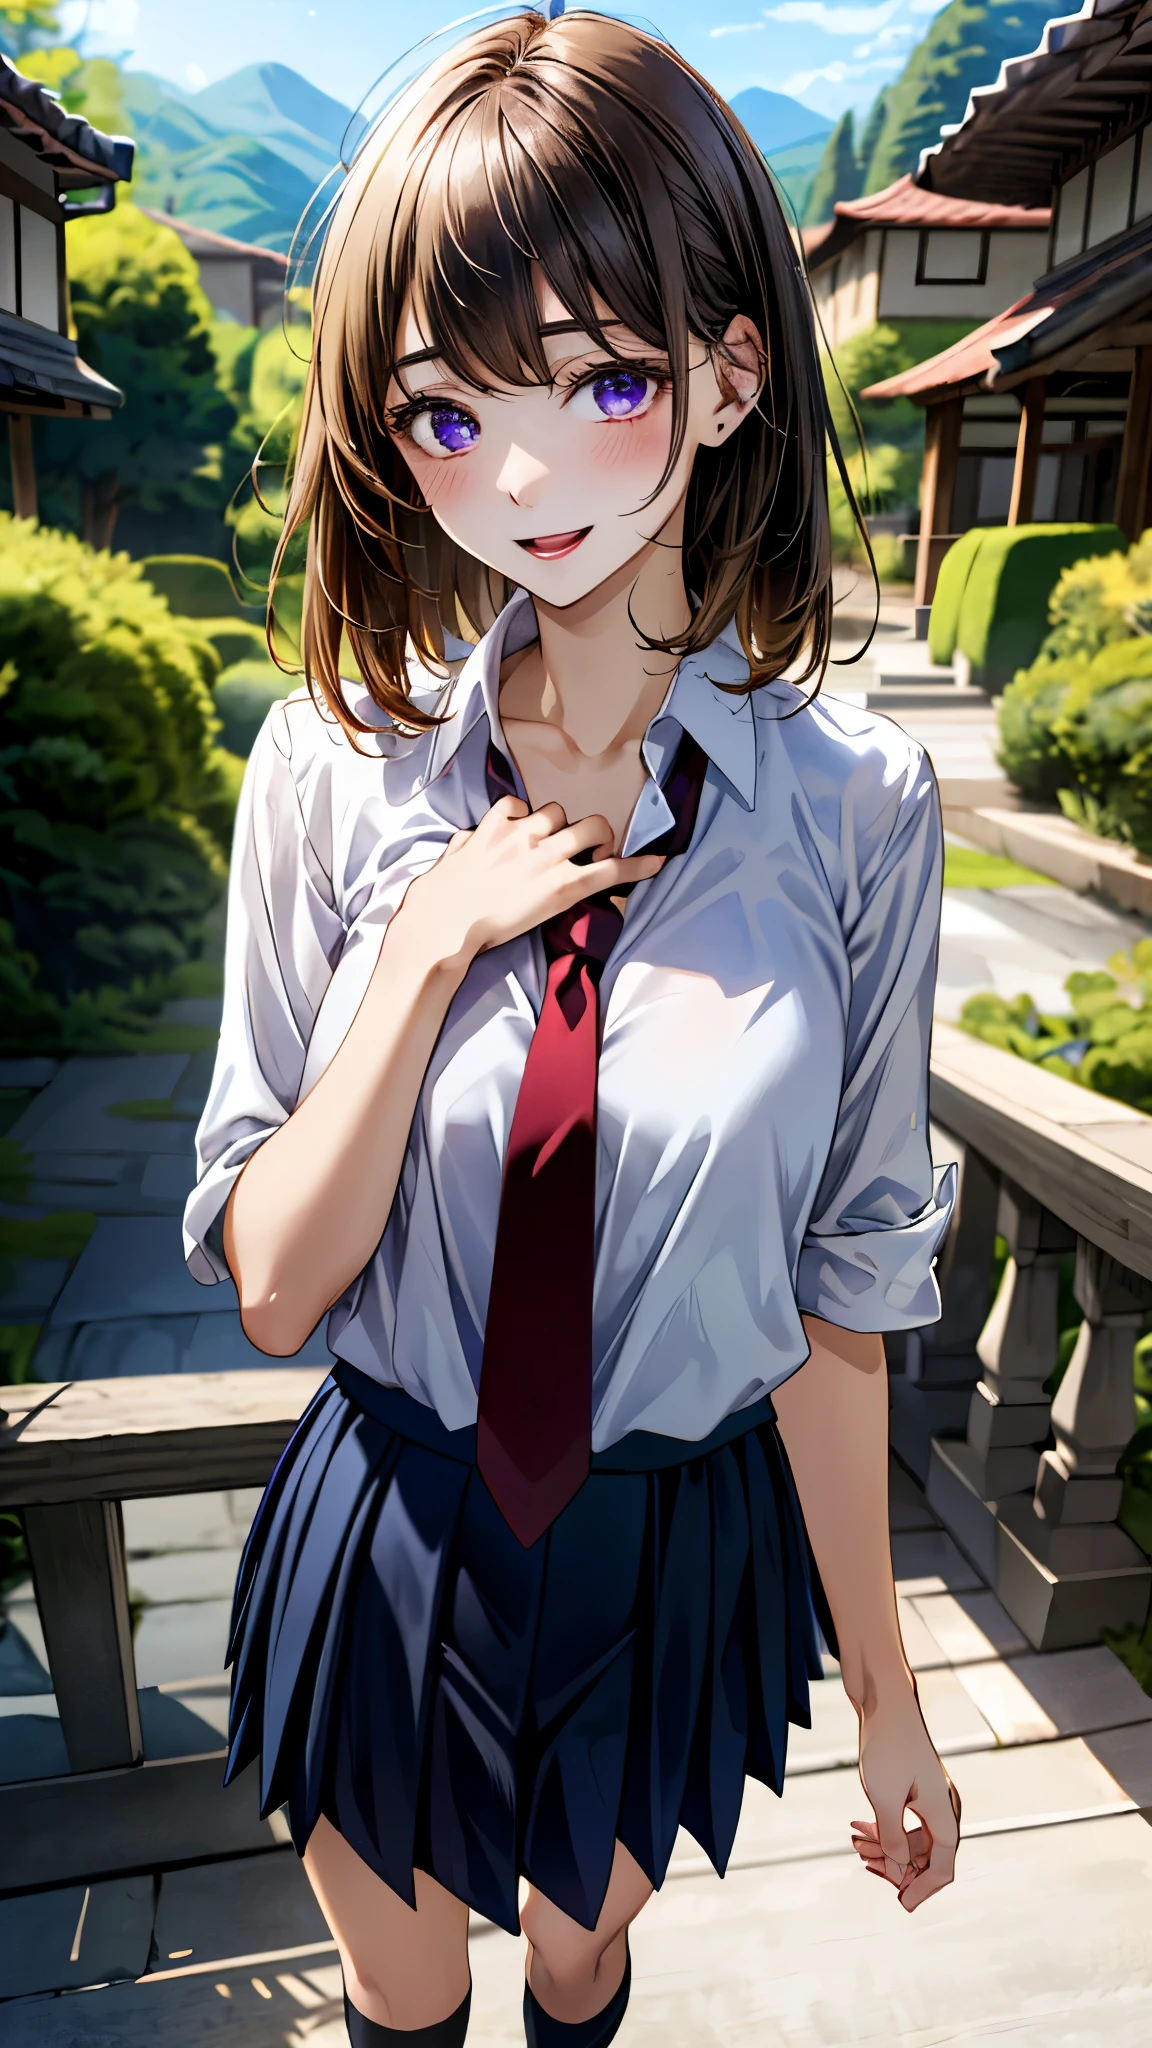 (masterpiece:1.3, top-quality, ultra high res, ultra detailed), (realistic, photorealistic:1.4), beautiful illustration, perfect lighting, natural lighting, colorful, depth of fields, 
beautiful detailed hair, beautiful detailed face, beautiful detailed eyes, beautiful clavicle, beautiful body, beautiful chest, beautiful thigh, beautiful legs, beautiful fingers, 
looking at viewer, 1 girl, japanese, high school girl, perfect face, (perfect anatomy, anatomically correct), cute and symmetrical face, babyface, , shiny skin, 
(middle hair:1.5, straight hair:1.4, blonde hair), swept bangs, cliped bangs, dark purple eyes, long eye lasher, (medium breasts), slender, 
((collared white shirt, navy pleated skirt, dark red tie)), navy school socks, , 
(beautiful scenery), evening, (hot spring town), standing, hands on chest, (seductive smile, open mouth), 